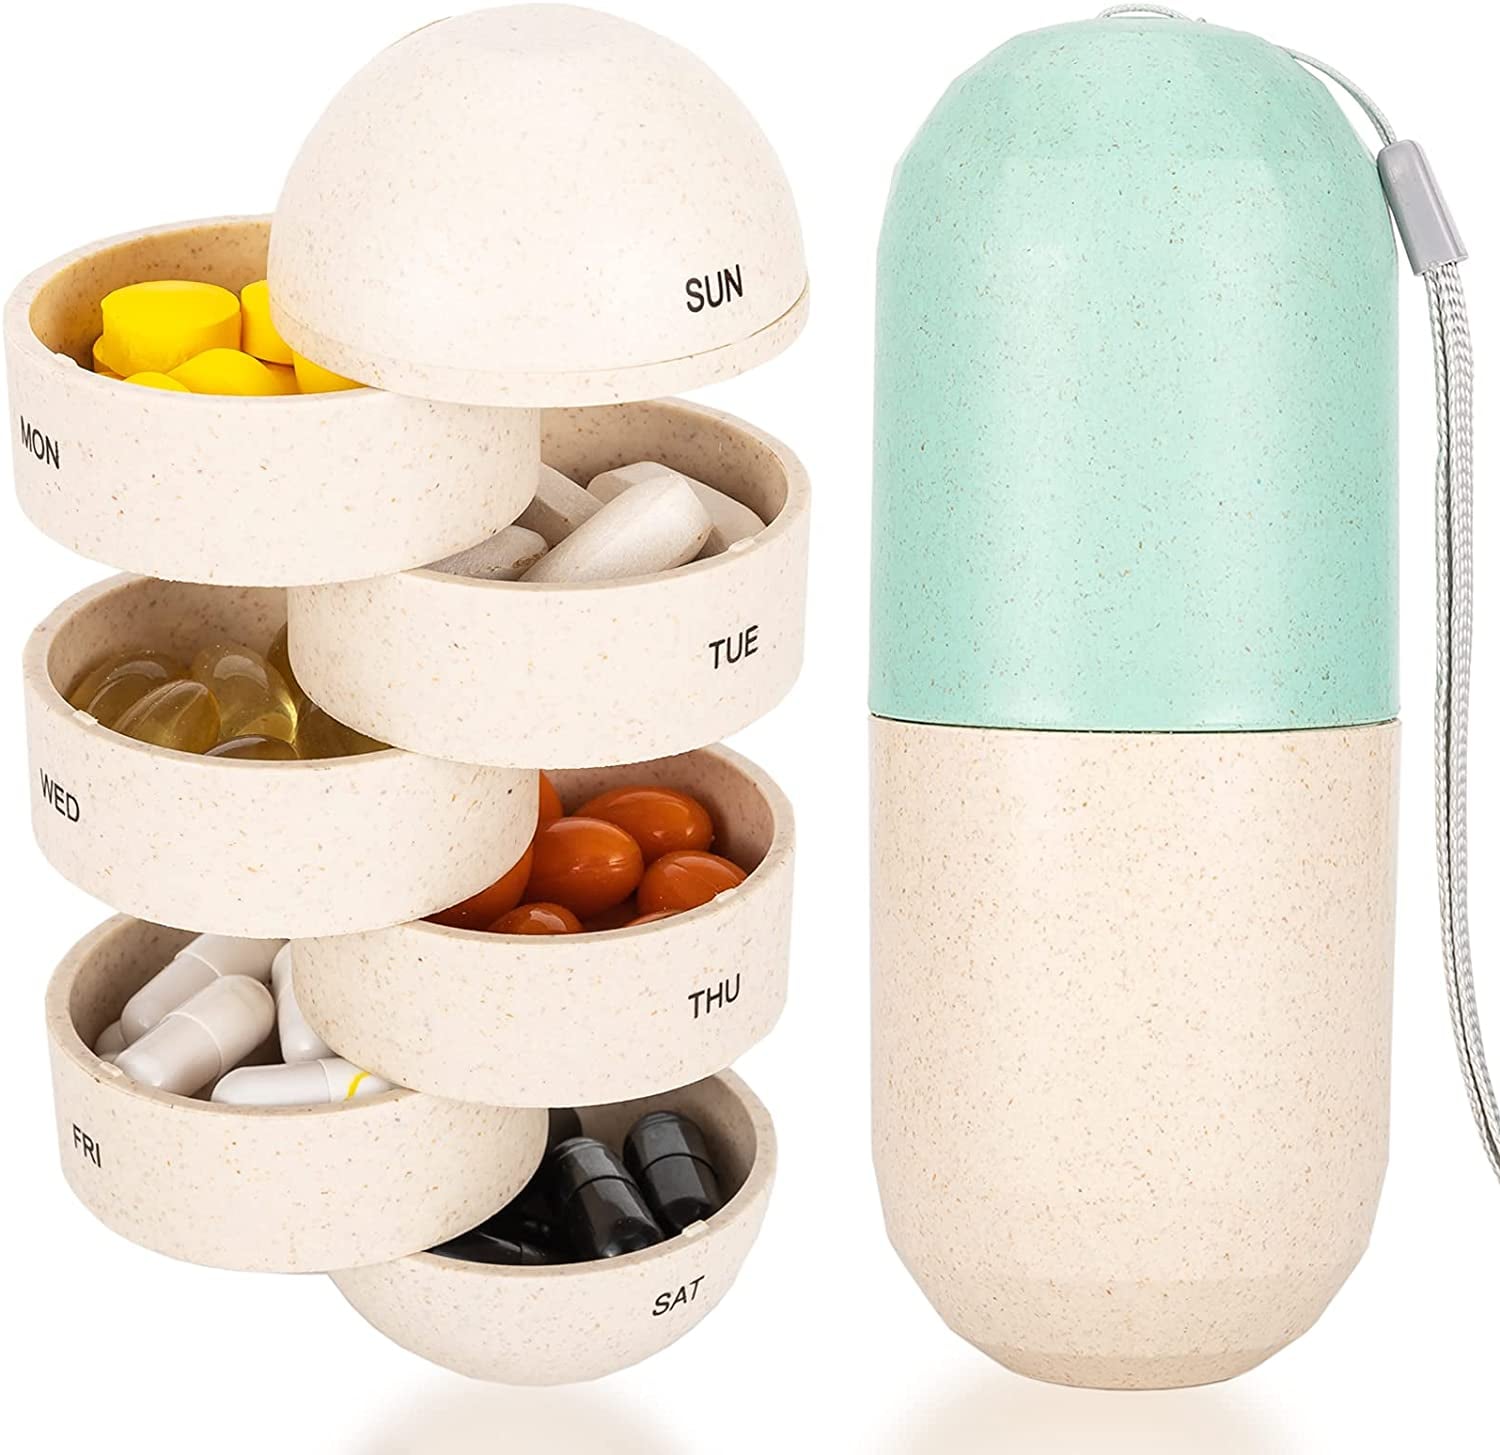 20 Cute Pill Organizers and Cases | POPSUGAR Fitness